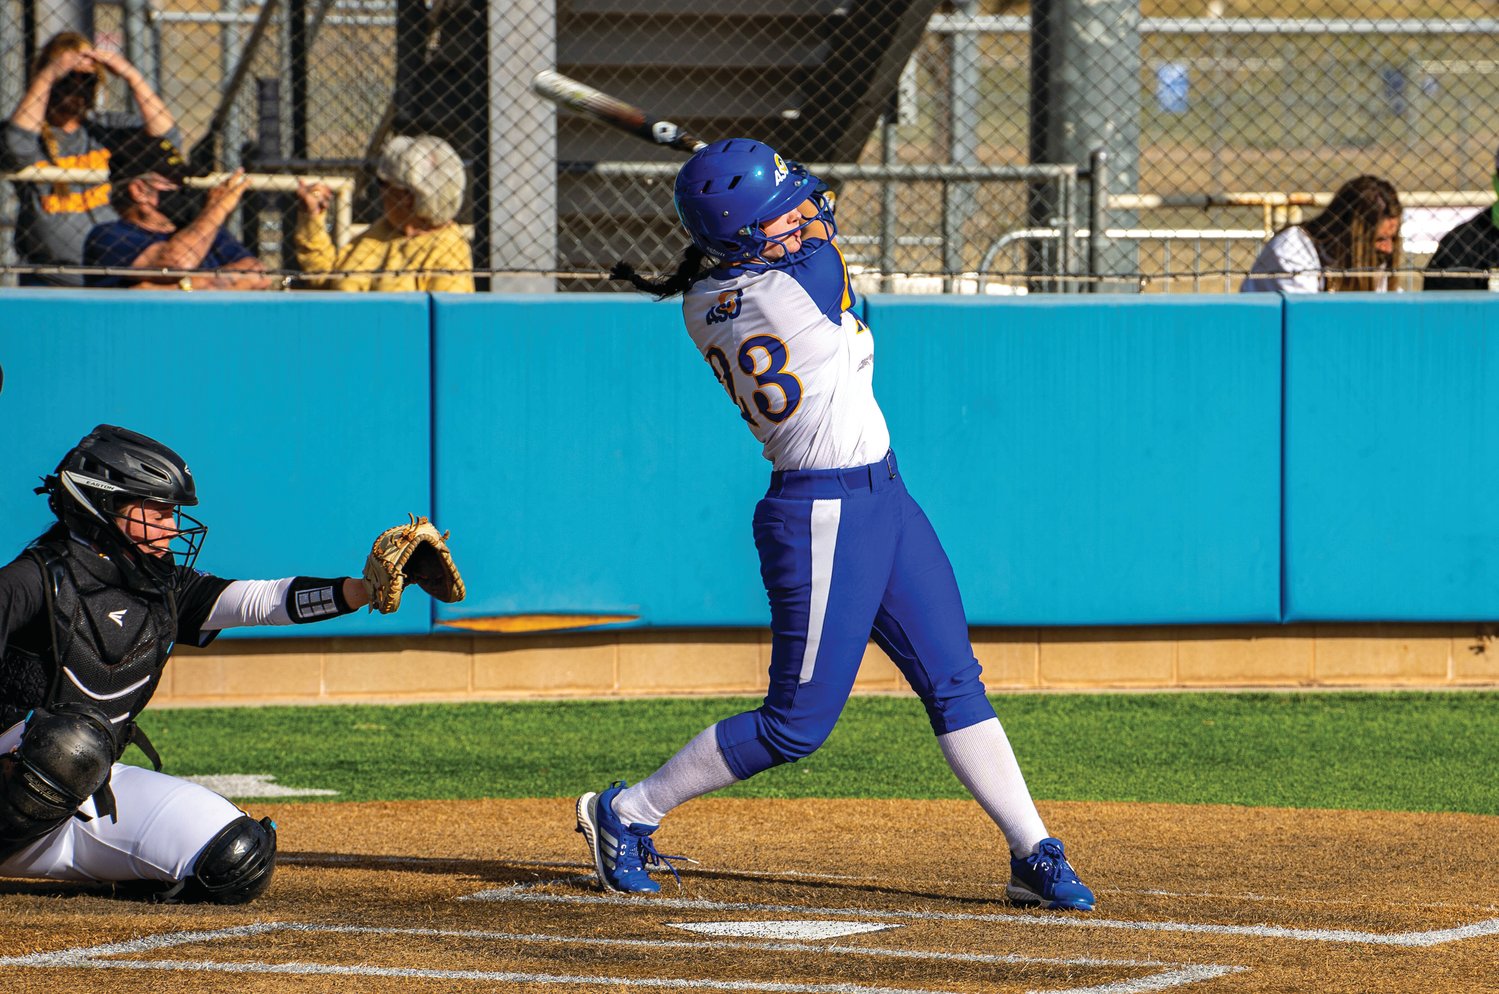 Maleya Burns hits the ball out into the field at a game for Angelo State University.